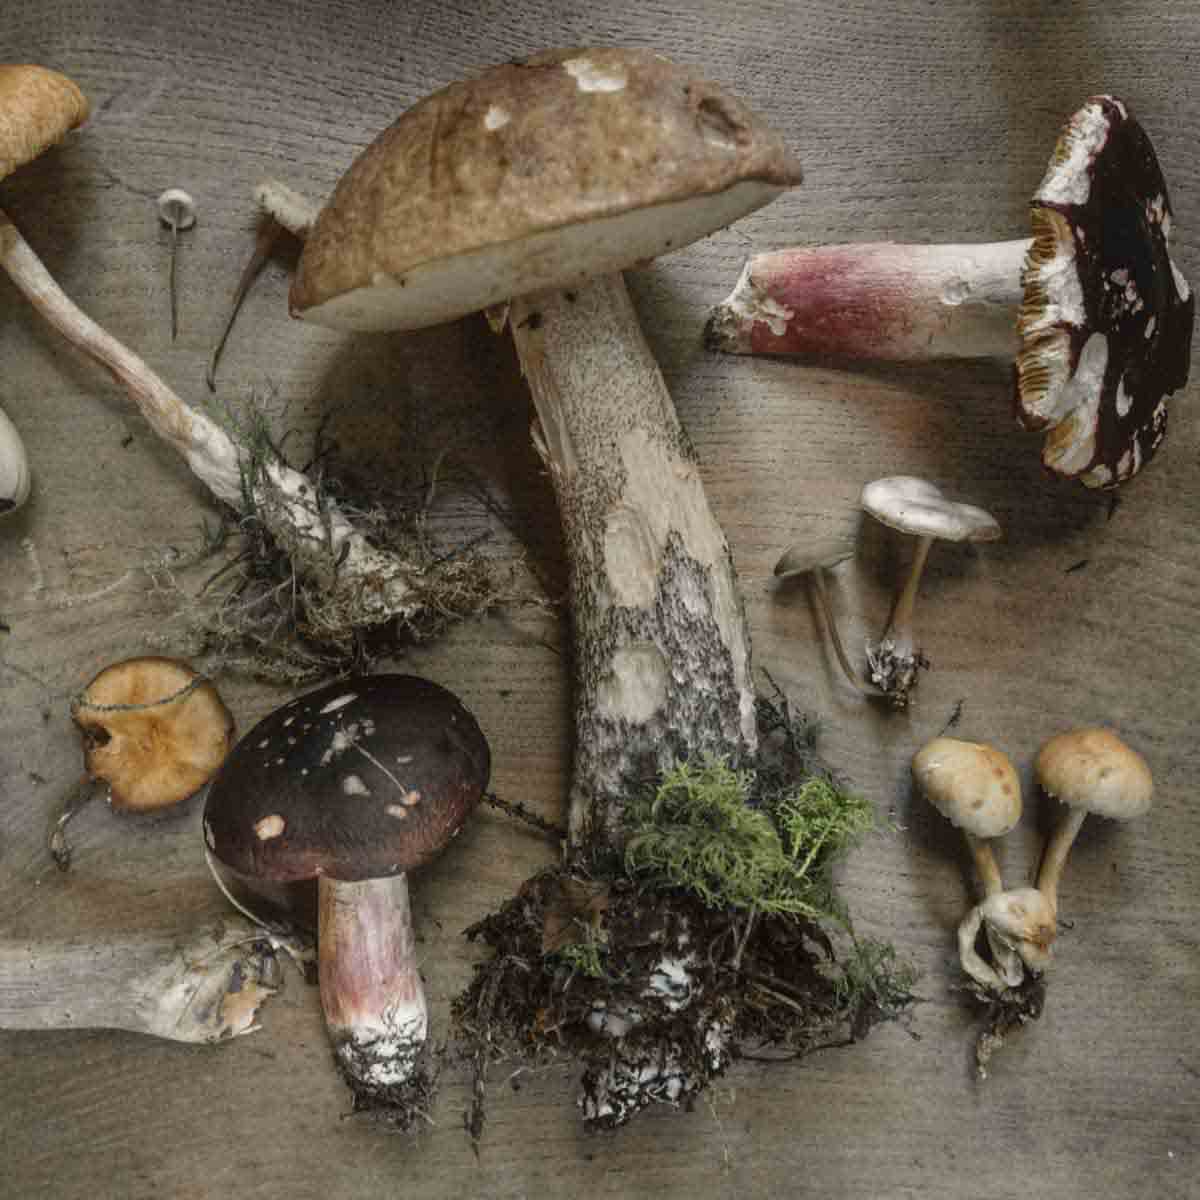 A variety of picked mushrooms laid out on table.